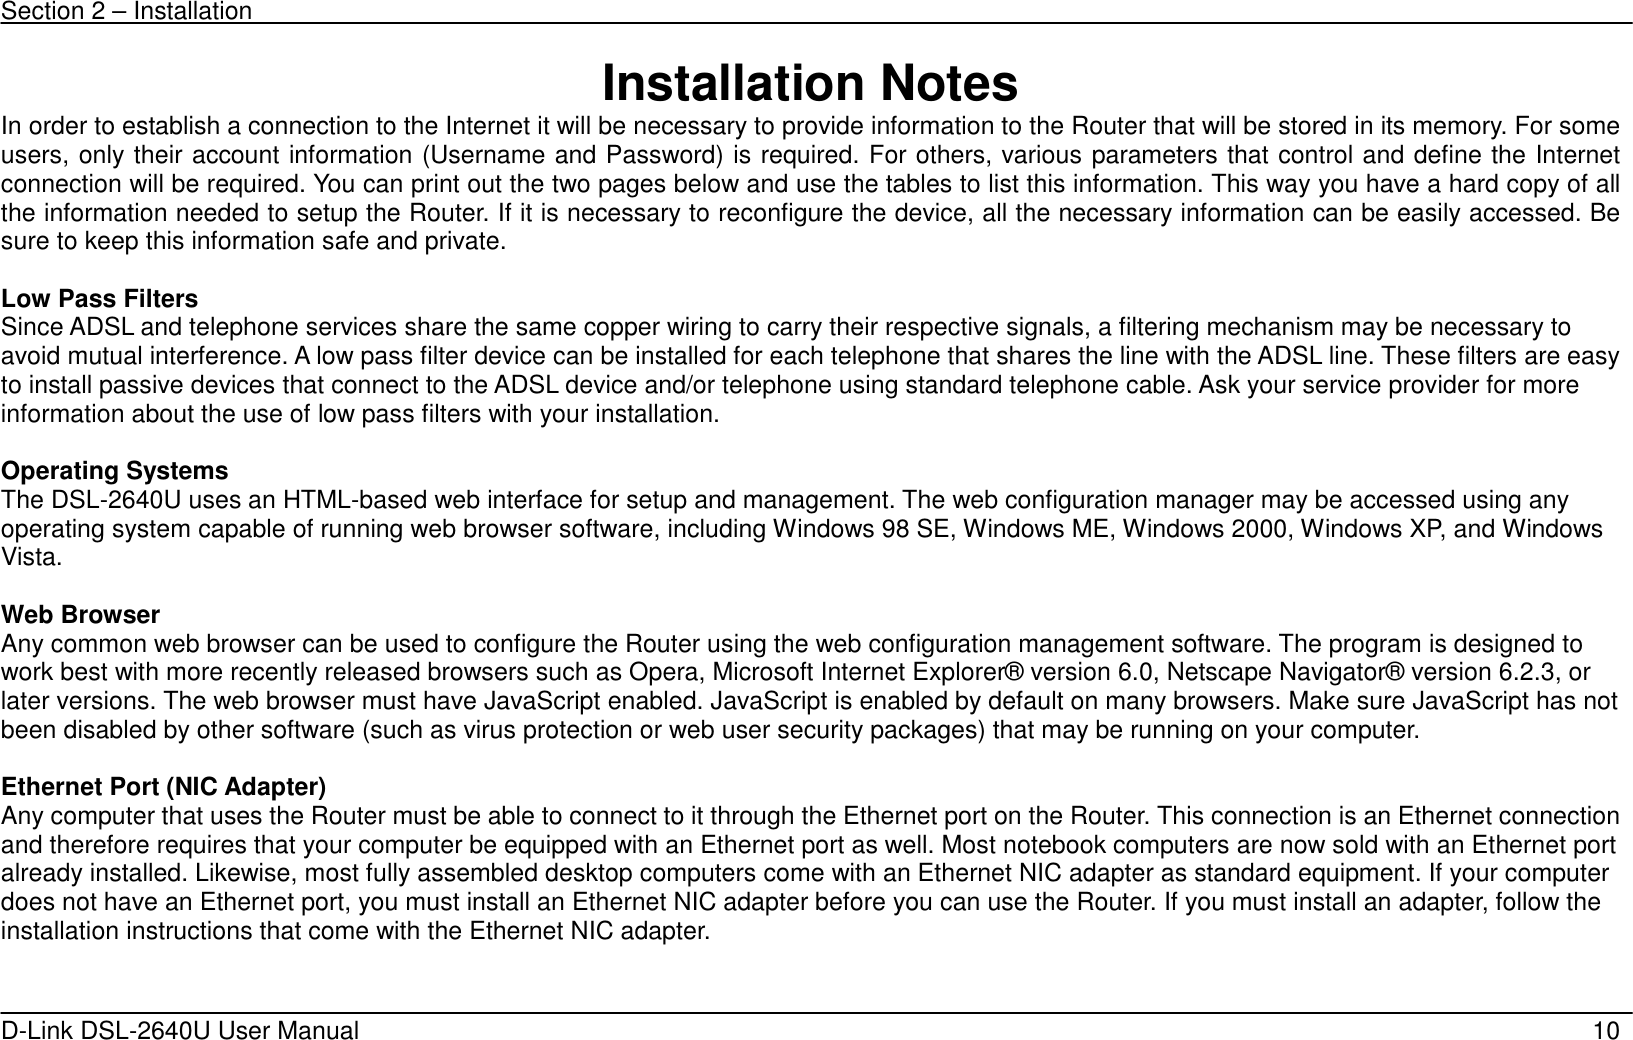 Section 2 – Installation   D-Link DSL-2640U User Manual    10 Installation Notes In order to establish a connection to the Internet it will be necessary to provide information to the Router that will be stored in its memory. For some users, only their account information (Username and Password) is required. For others, various parameters that control and define the Internet connection will be required. You can print out the two pages below and use the tables to list this information. This way you have a hard copy of all the information needed to setup the Router. If it is necessary to reconfigure the device, all the necessary information can be easily accessed. Be sure to keep this information safe and private.  Low Pass Filters Since ADSL and telephone services share the same copper wiring to carry their respective signals, a filtering mechanism may be necessary to avoid mutual interference. A low pass filter device can be installed for each telephone that shares the line with the ADSL line. These filters are easy to install passive devices that connect to the ADSL device and/or telephone using standard telephone cable. Ask your service provider for more information about the use of low pass filters with your installation.    Operating Systems The DSL-2640U uses an HTML-based web interface for setup and management. The web configuration manager may be accessed using any operating system capable of running web browser software, including Windows 98 SE, Windows ME, Windows 2000, Windows XP, and Windows Vista.   Web Browser Any common web browser can be used to configure the Router using the web configuration management software. The program is designed to work best with more recently released browsers such as Opera, Microsoft Internet Explorer® version 6.0, Netscape Navigator® version 6.2.3, or later versions. The web browser must have JavaScript enabled. JavaScript is enabled by default on many browsers. Make sure JavaScript has not been disabled by other software (such as virus protection or web user security packages) that may be running on your computer.  Ethernet Port (NIC Adapter) Any computer that uses the Router must be able to connect to it through the Ethernet port on the Router. This connection is an Ethernet connection and therefore requires that your computer be equipped with an Ethernet port as well. Most notebook computers are now sold with an Ethernet port already installed. Likewise, most fully assembled desktop computers come with an Ethernet NIC adapter as standard equipment. If your computer does not have an Ethernet port, you must install an Ethernet NIC adapter before you can use the Router. If you must install an adapter, follow the installation instructions that come with the Ethernet NIC adapter.     